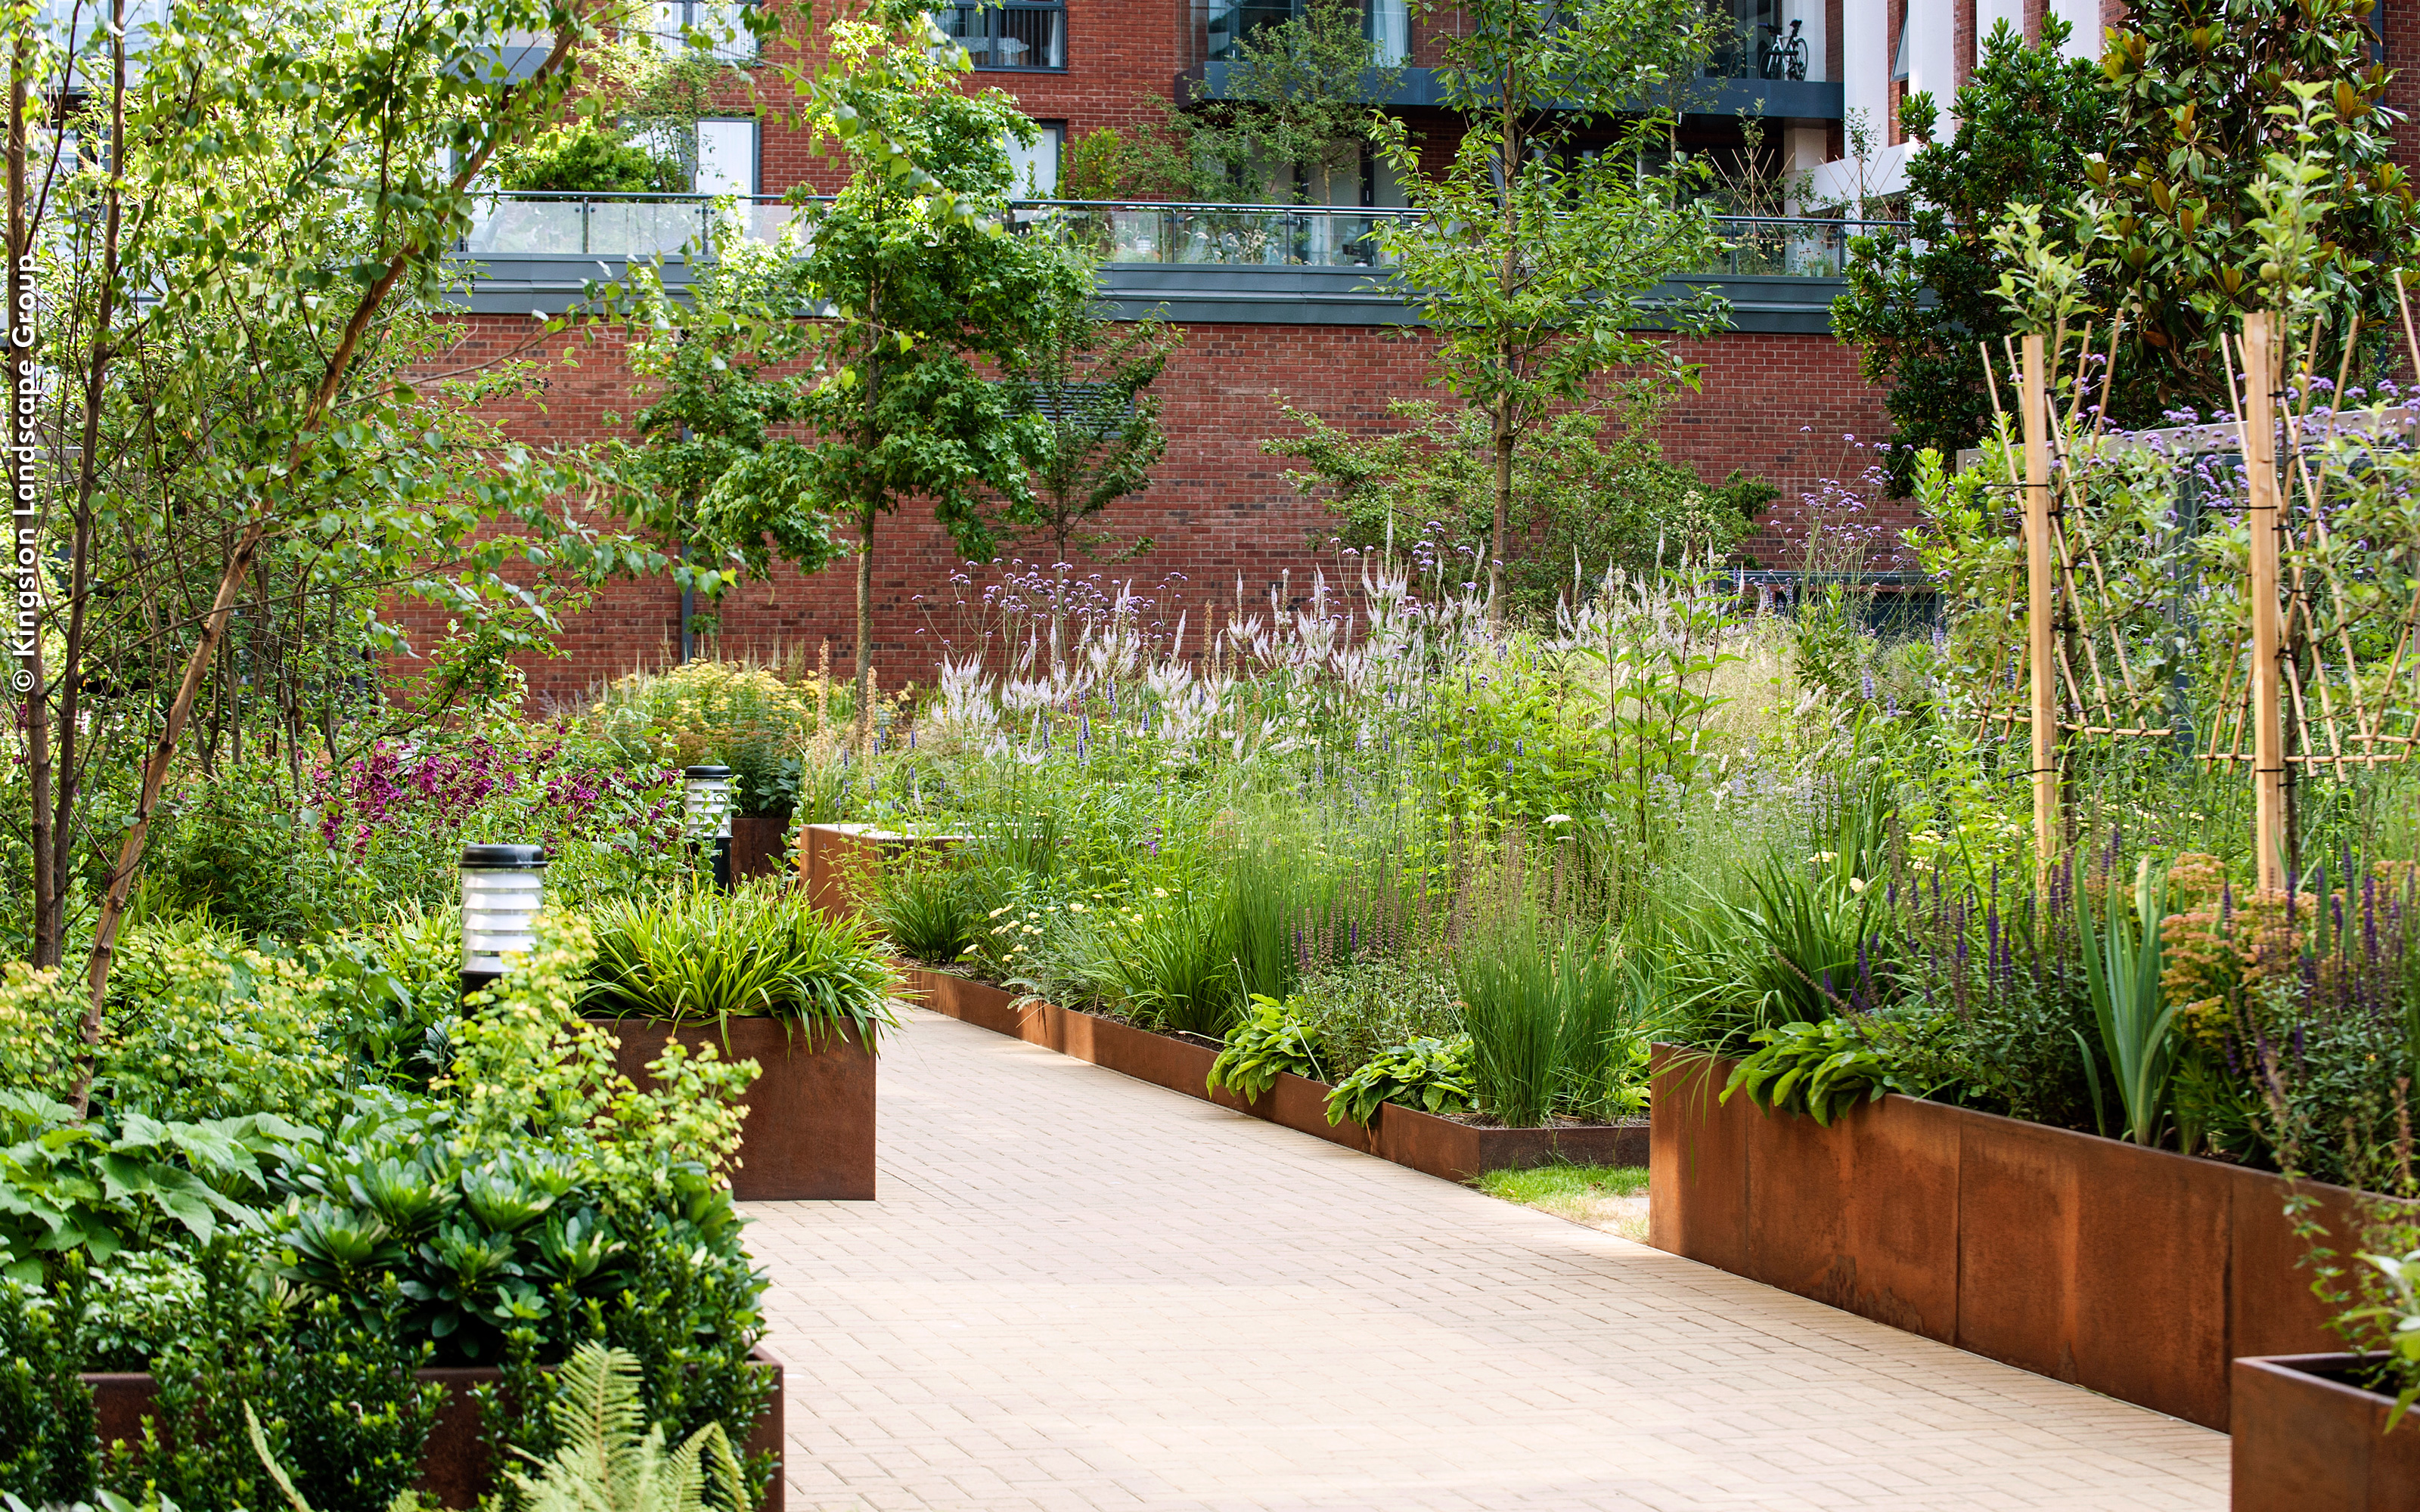 Large planters with a variety of flowers along a pathway